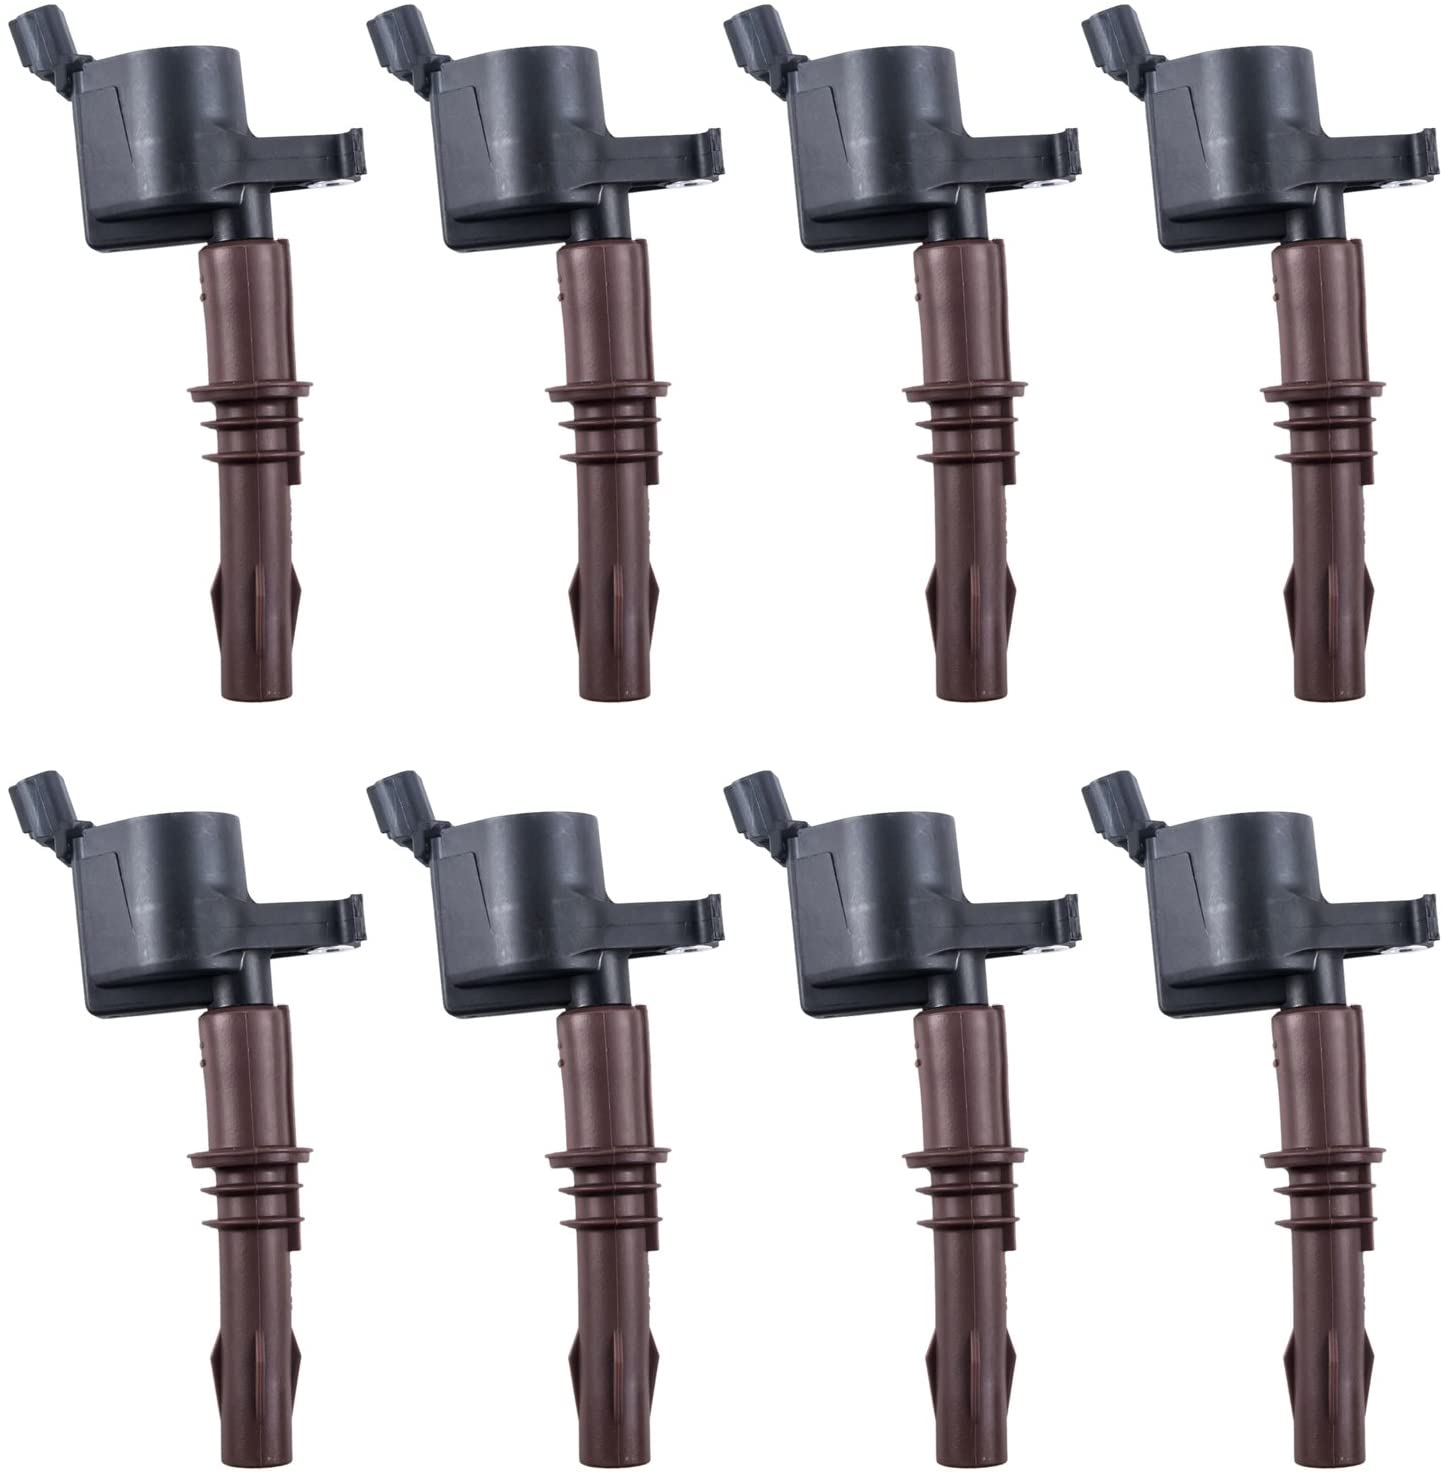 MAS DG521 Ignition Coils Compatible with Ford Lincoln Mercury V8 V10 2008-2014 (set of 8)